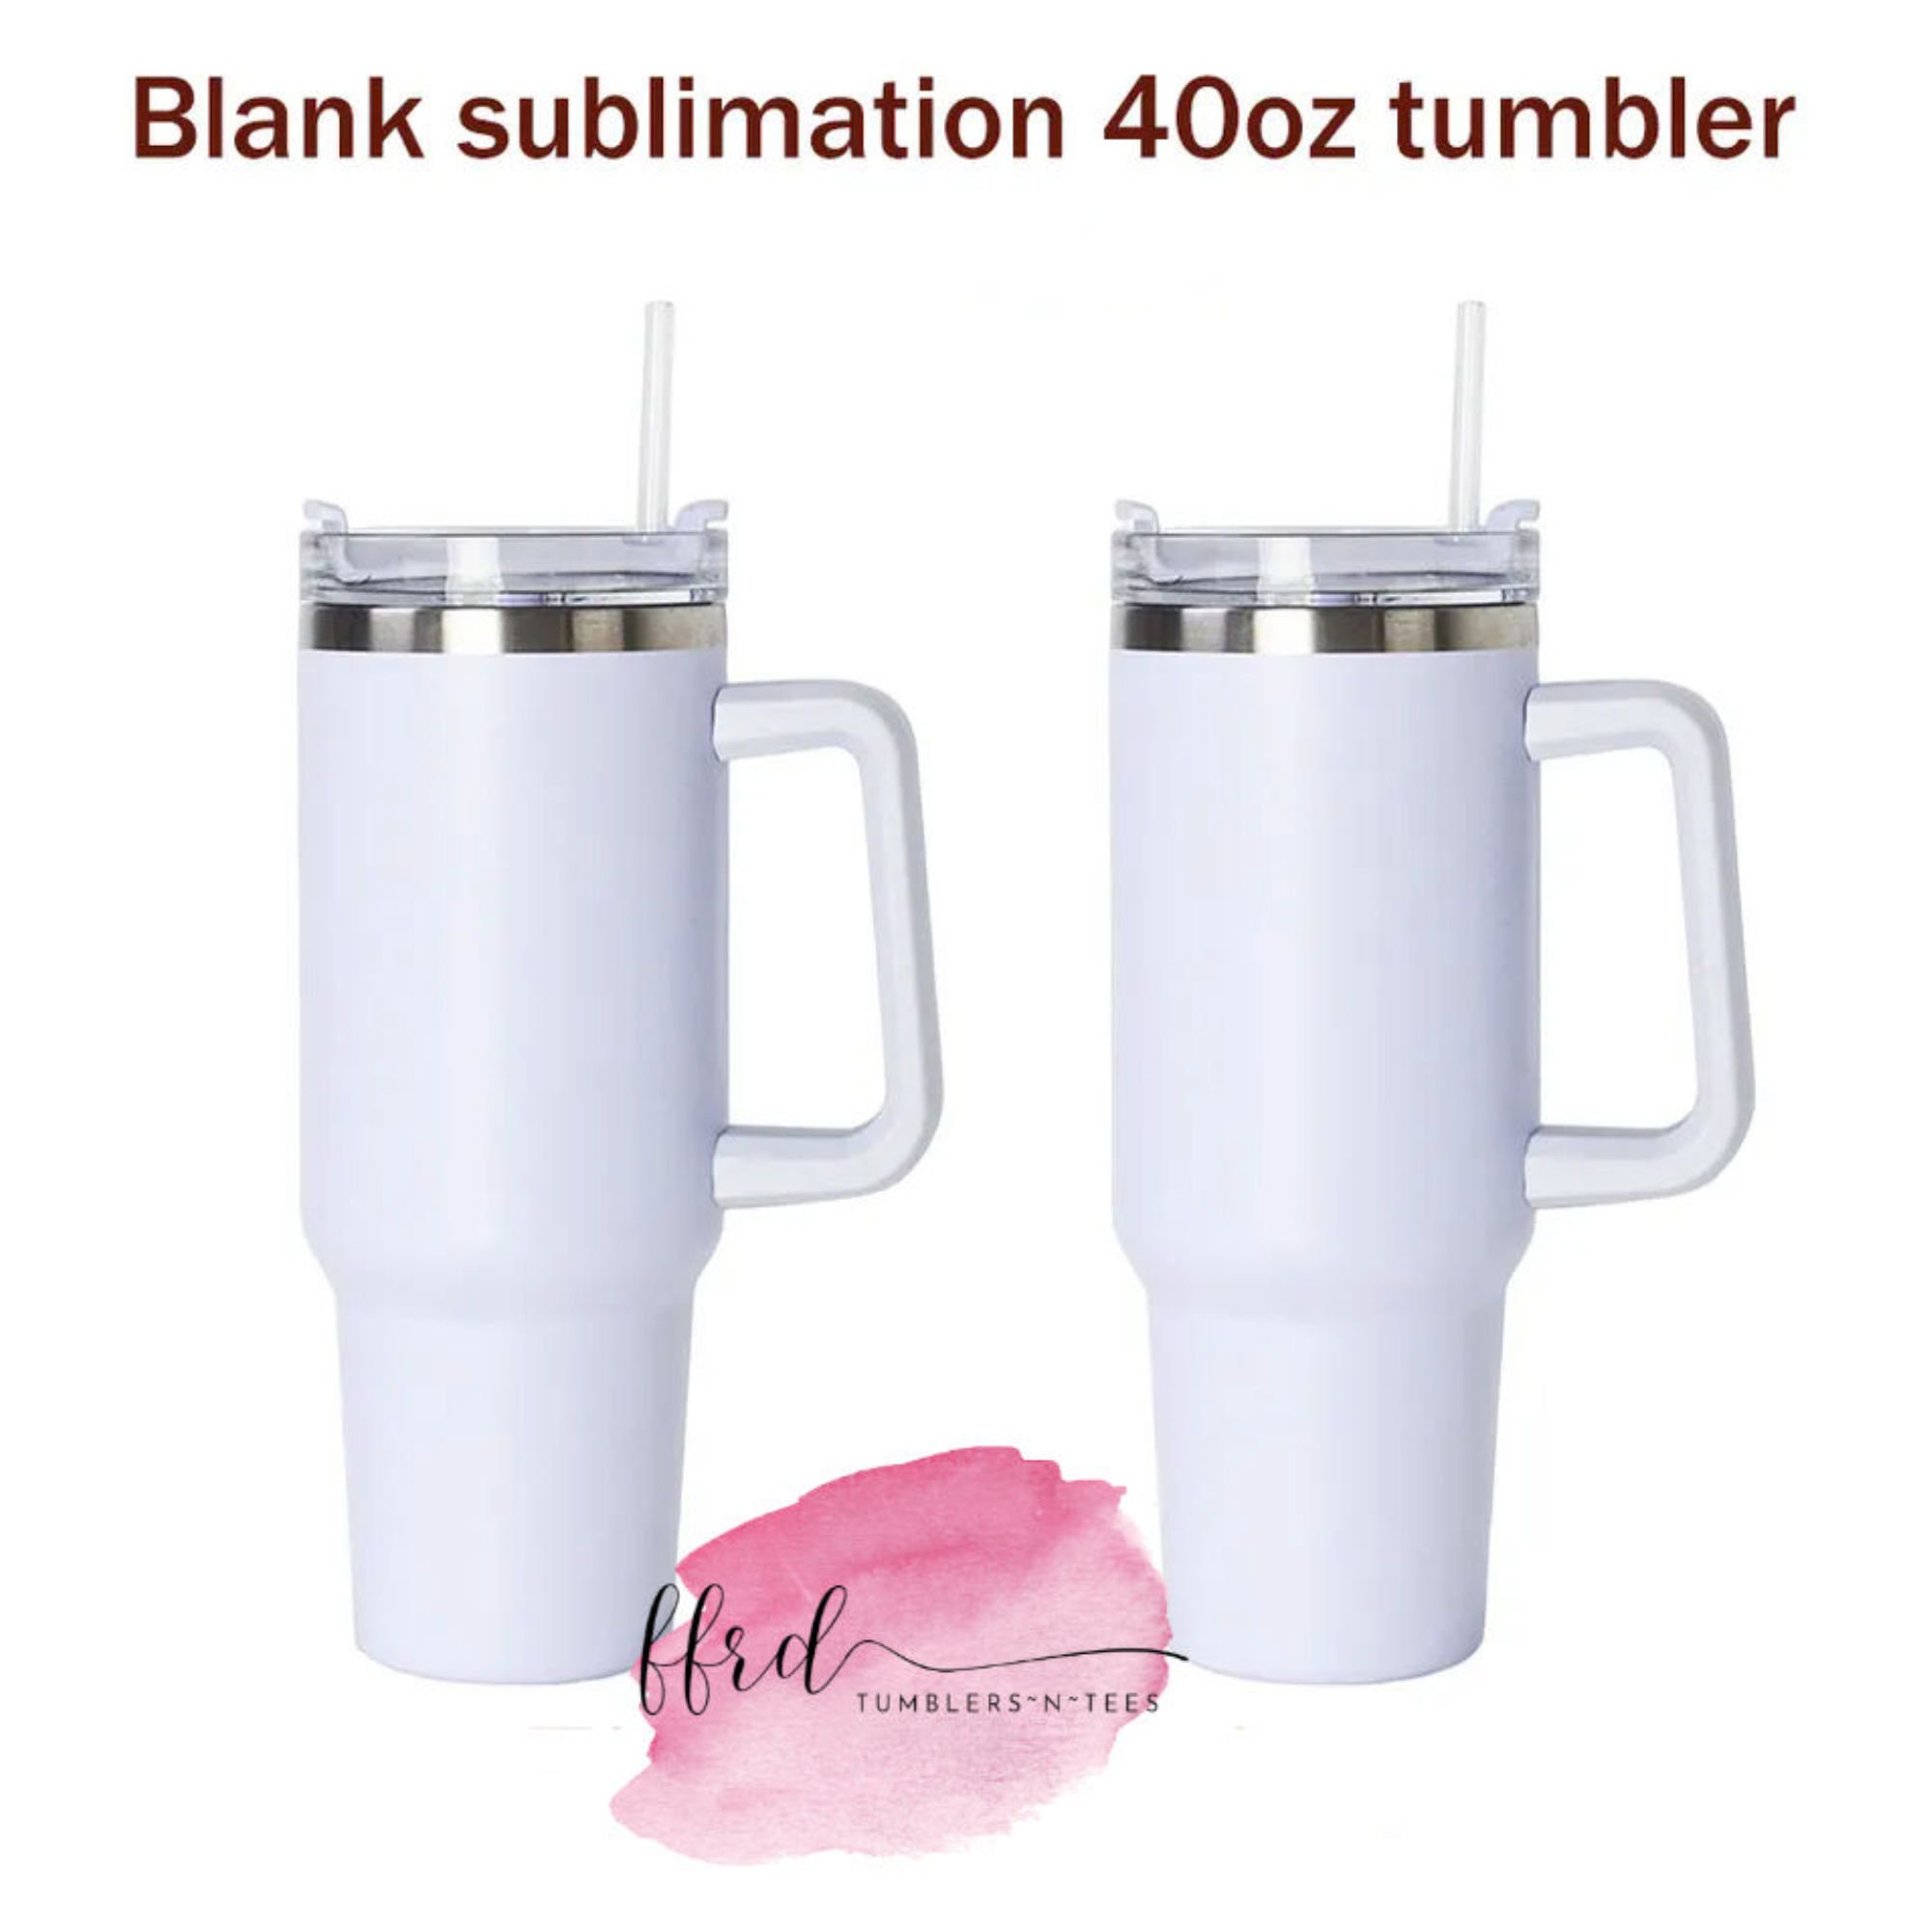  2 Pack 40oz Sublimation Tumbler With Handle And Straw Lid, Stanley  Dupe 40oz Sublimation Tumbler With Removable Handle, 40oz Sublimation  Tumbler Blanks For Heat Transfer : Arts, Crafts & Sewing